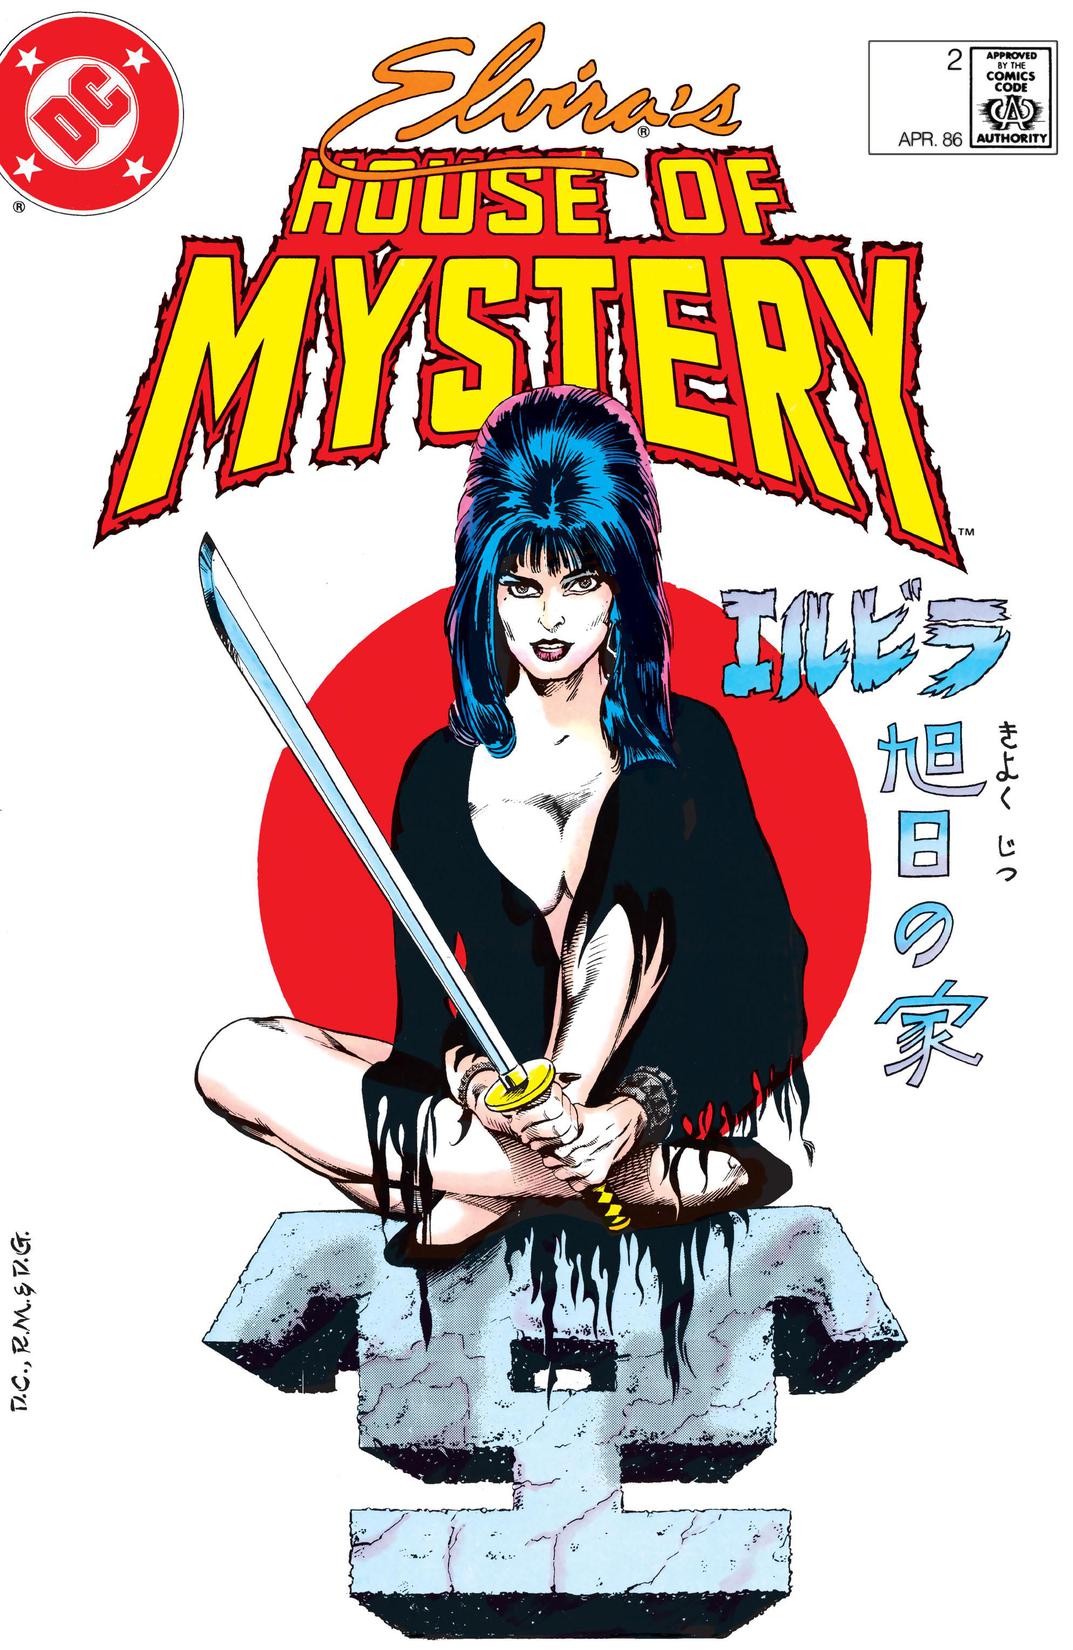 Elvira's House of Mystery #2 preview images